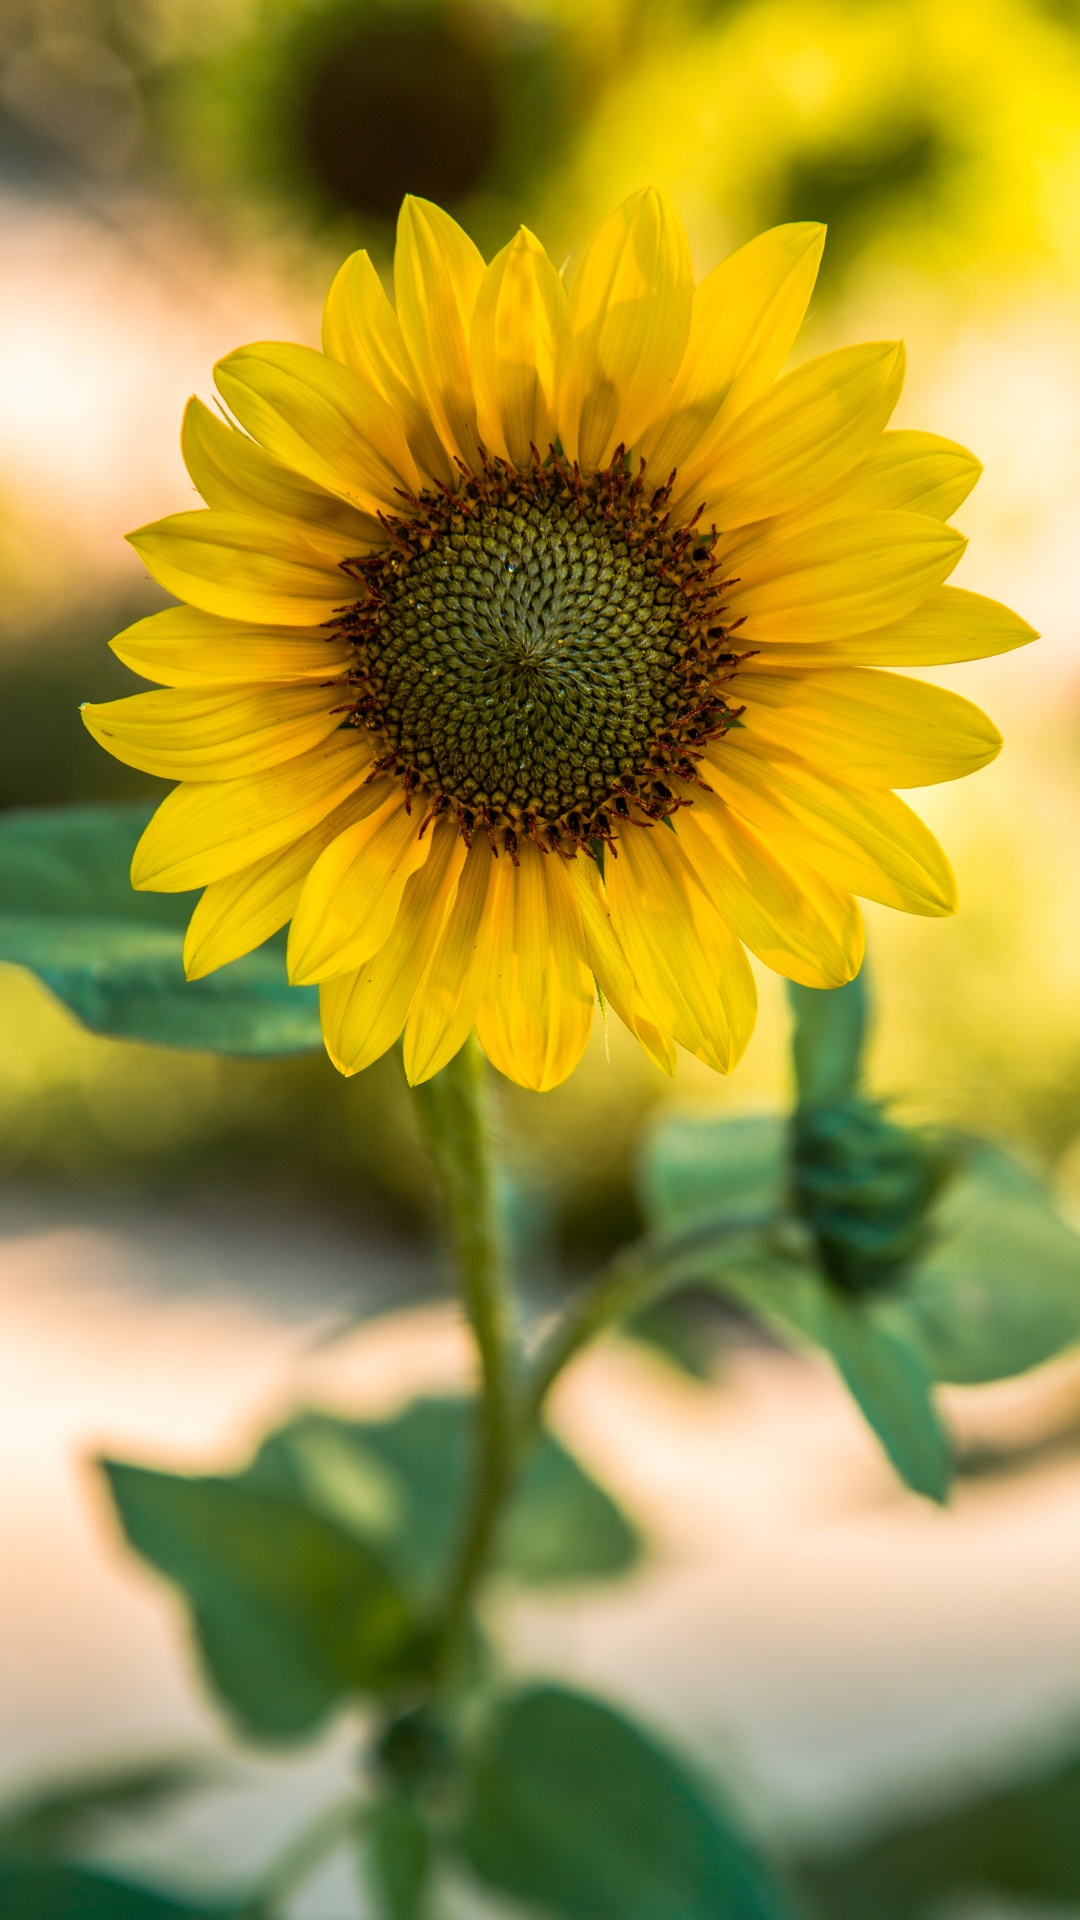 Yellow Sunflower in Close up Photography. Wallpaper in 1080x1920 Resolution